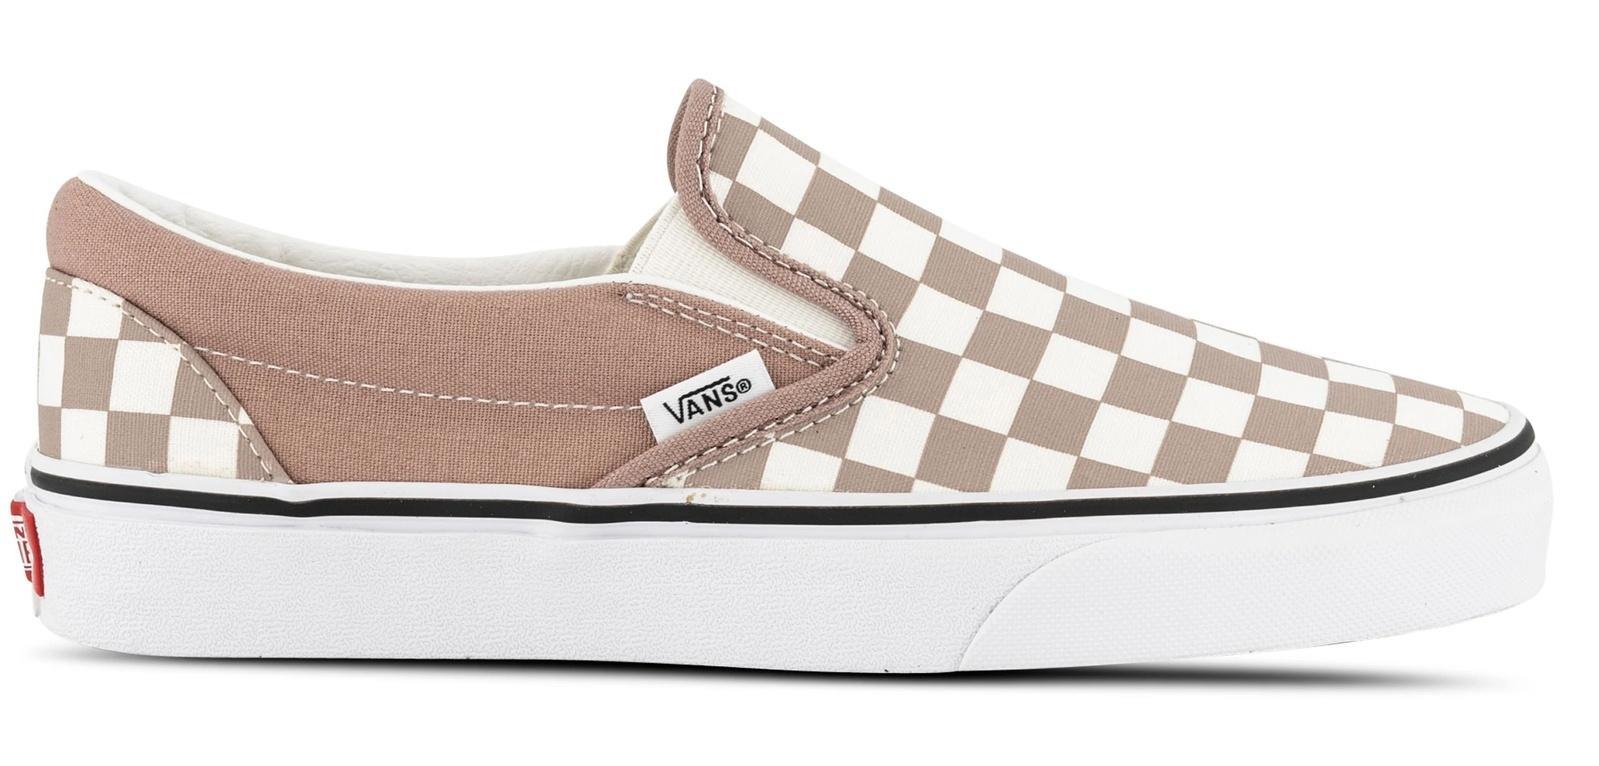 Vans Classic Slip On Canvas Sneaker Shoes Chess Check - Etherea/True White - US 8